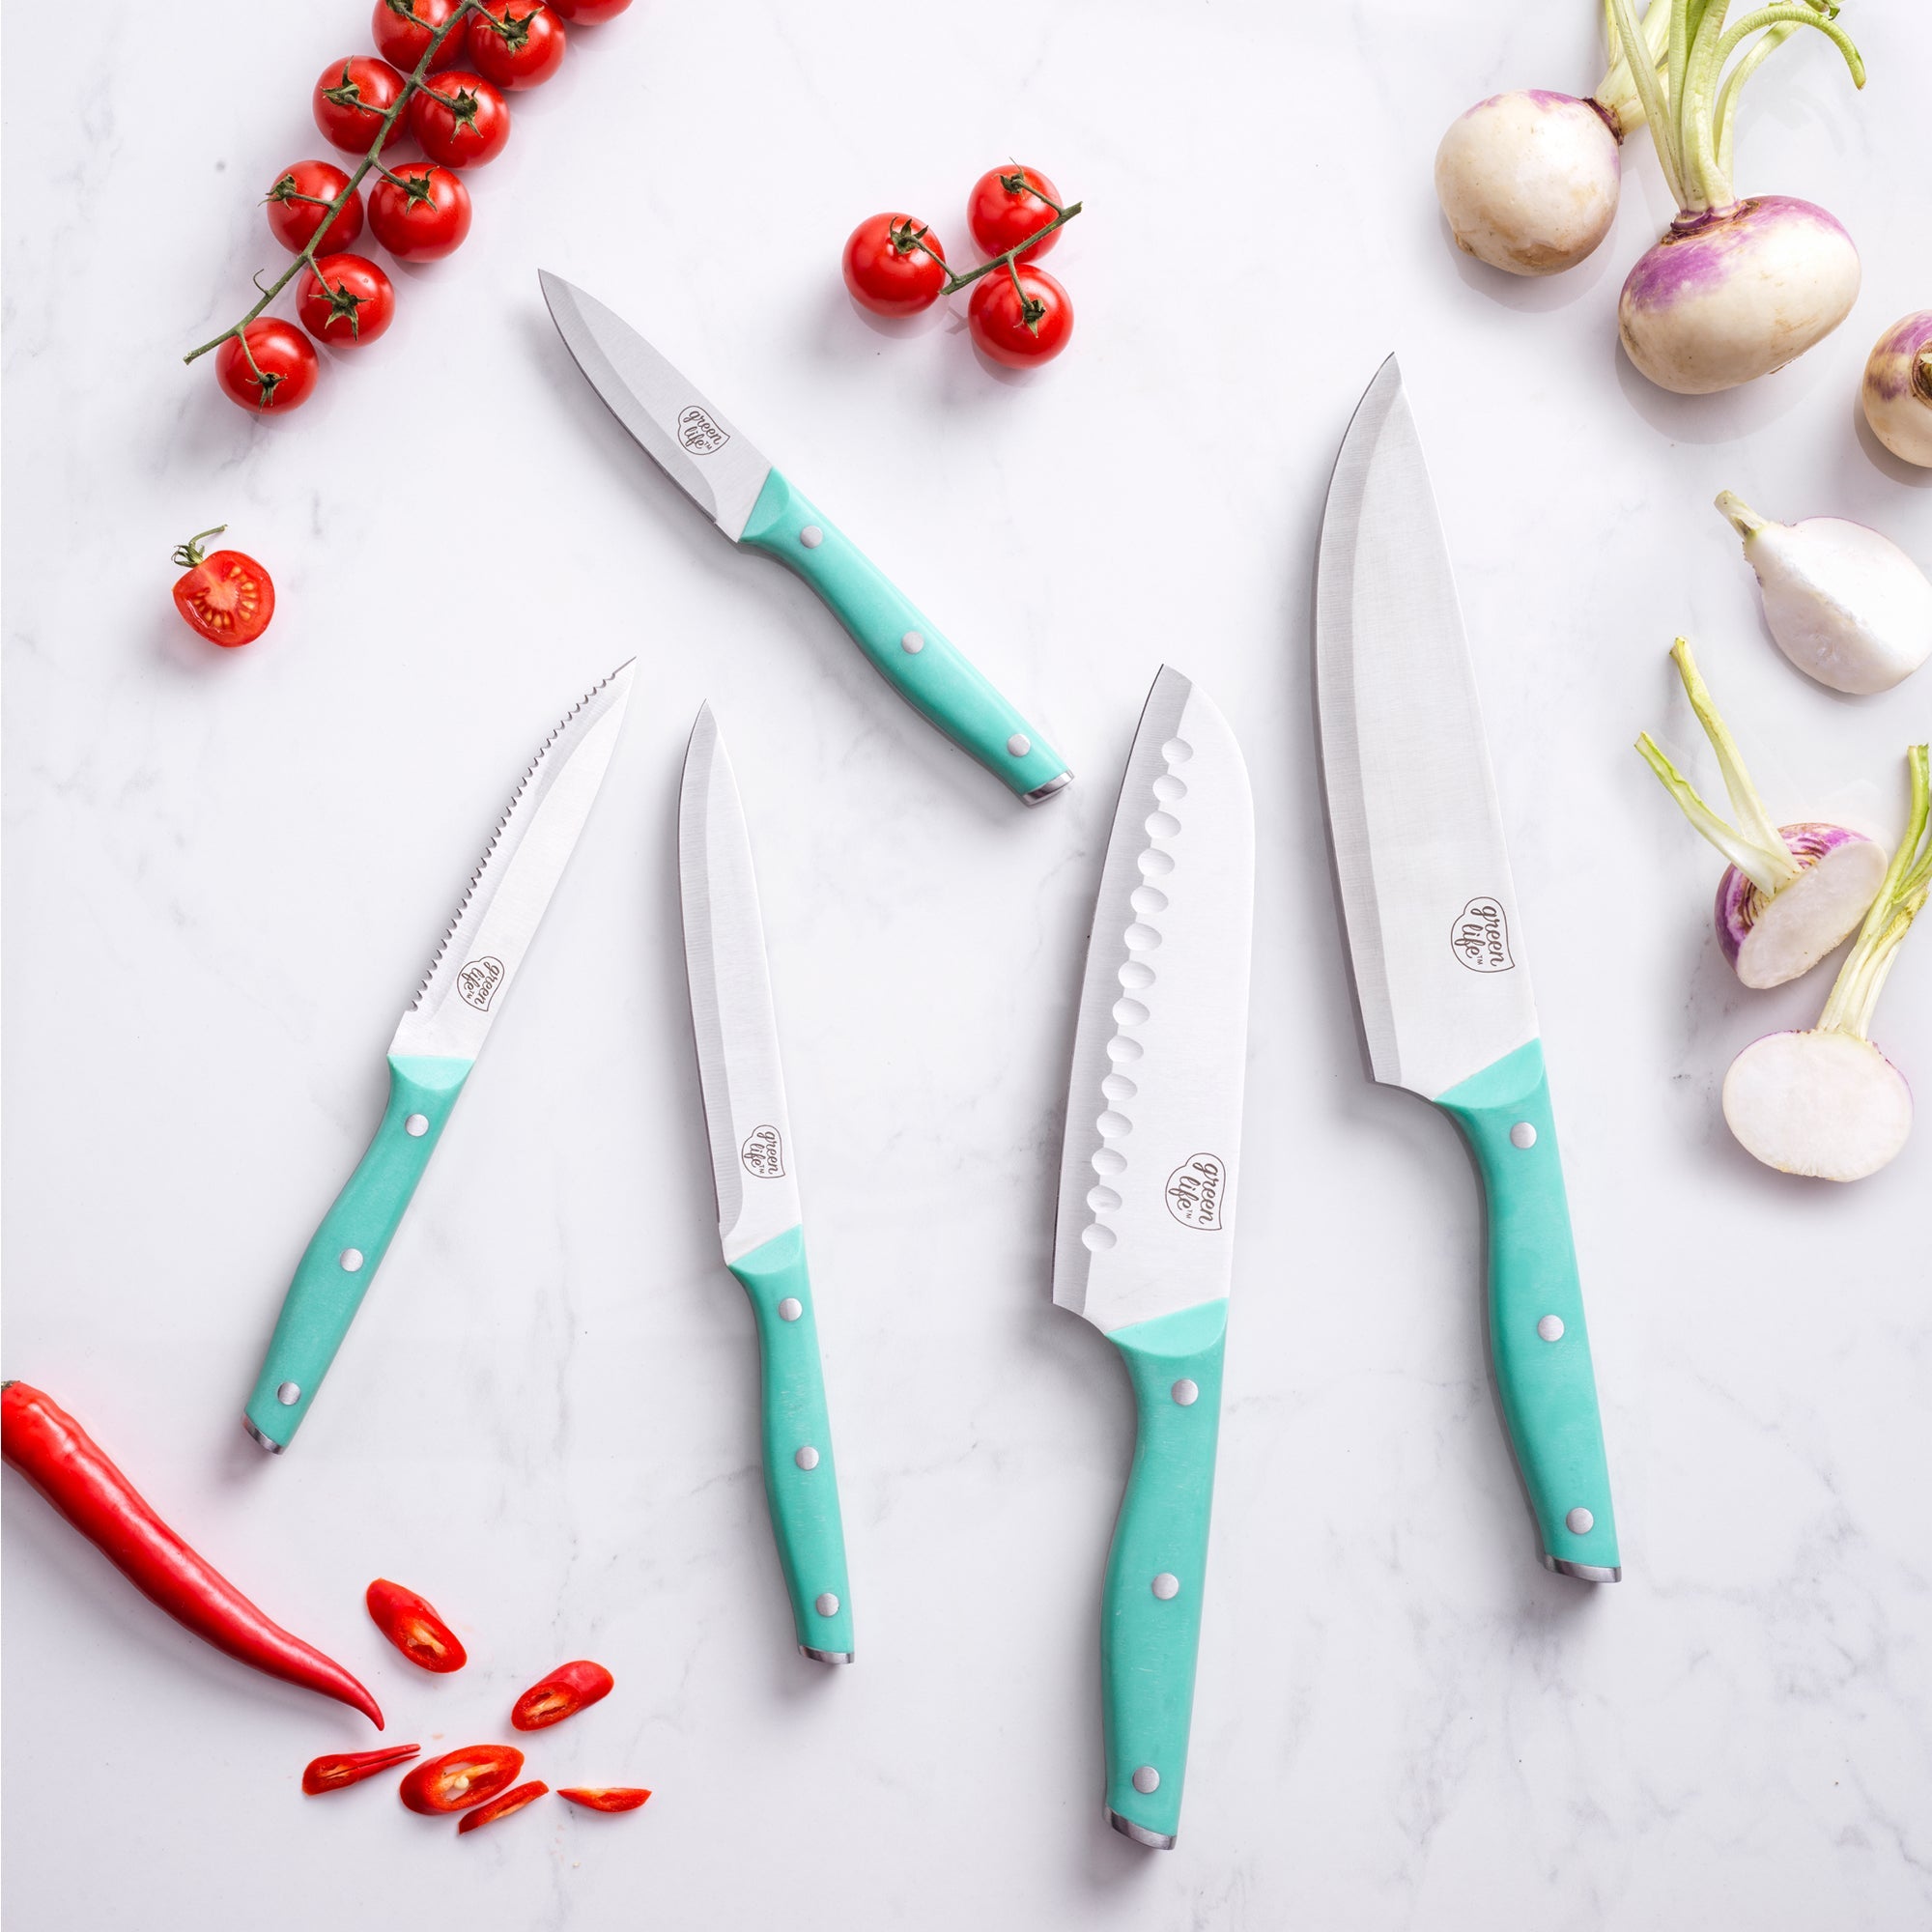 Turquoise Color Chef knife Set